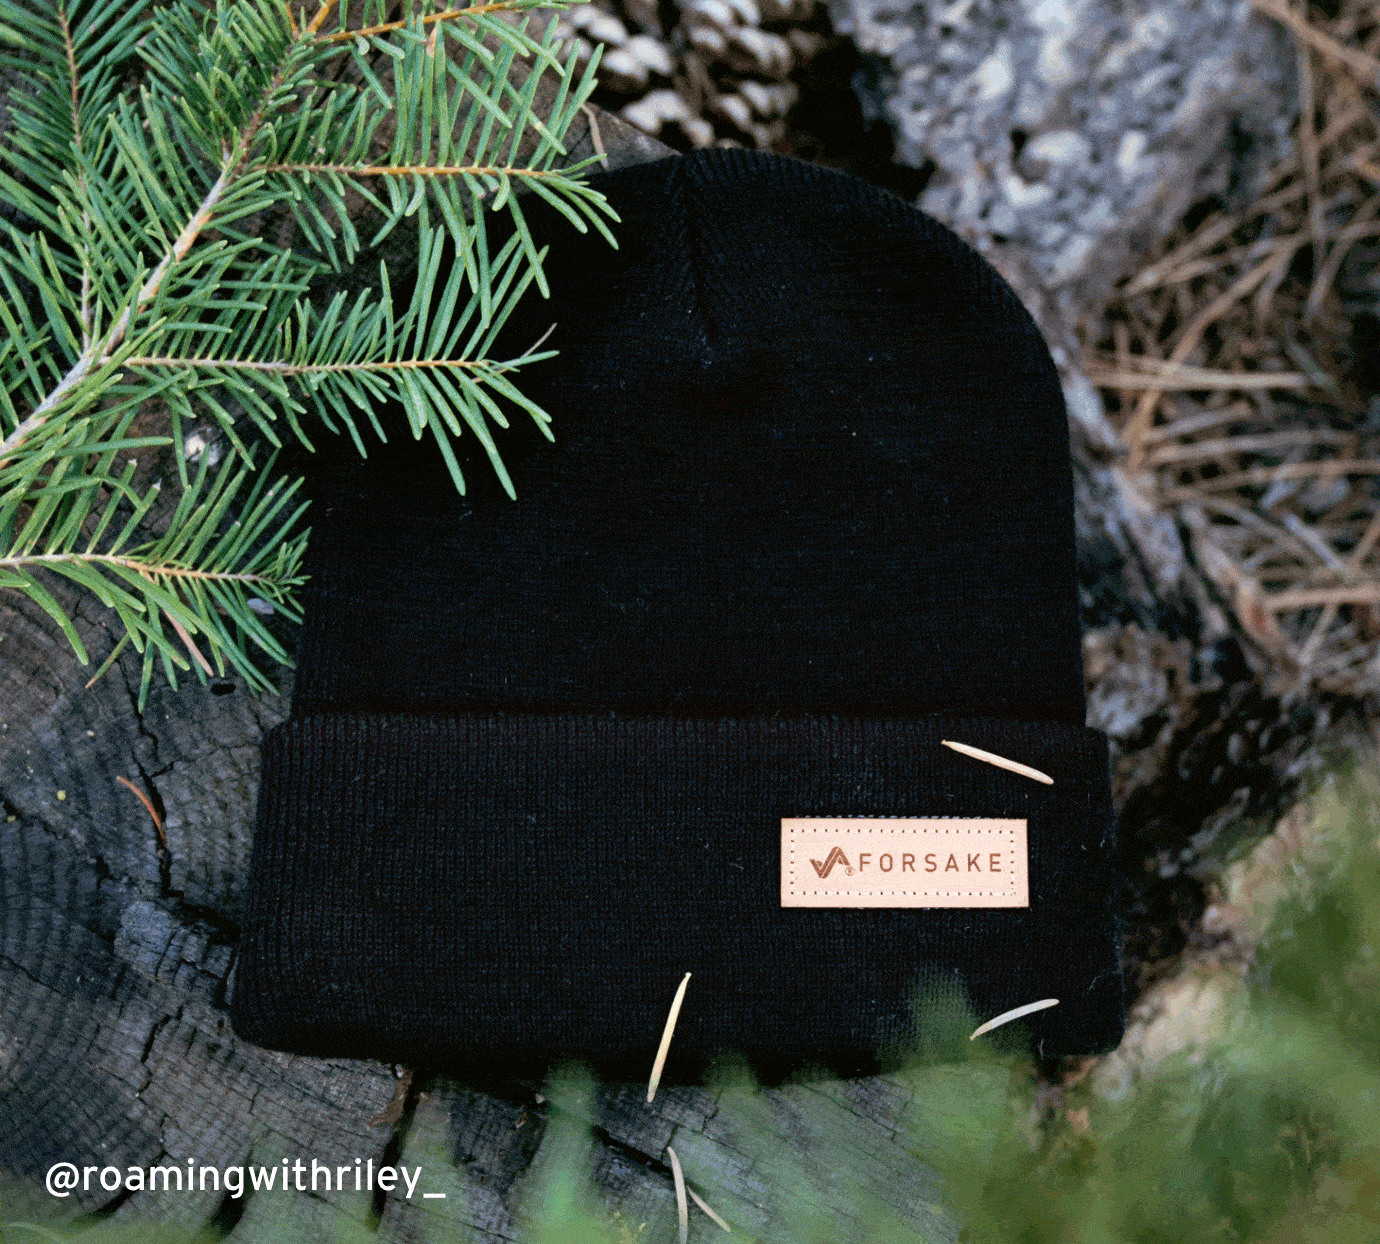 $20 off plus a free beanie hat with every purchase. Image features the beanie hat in black.